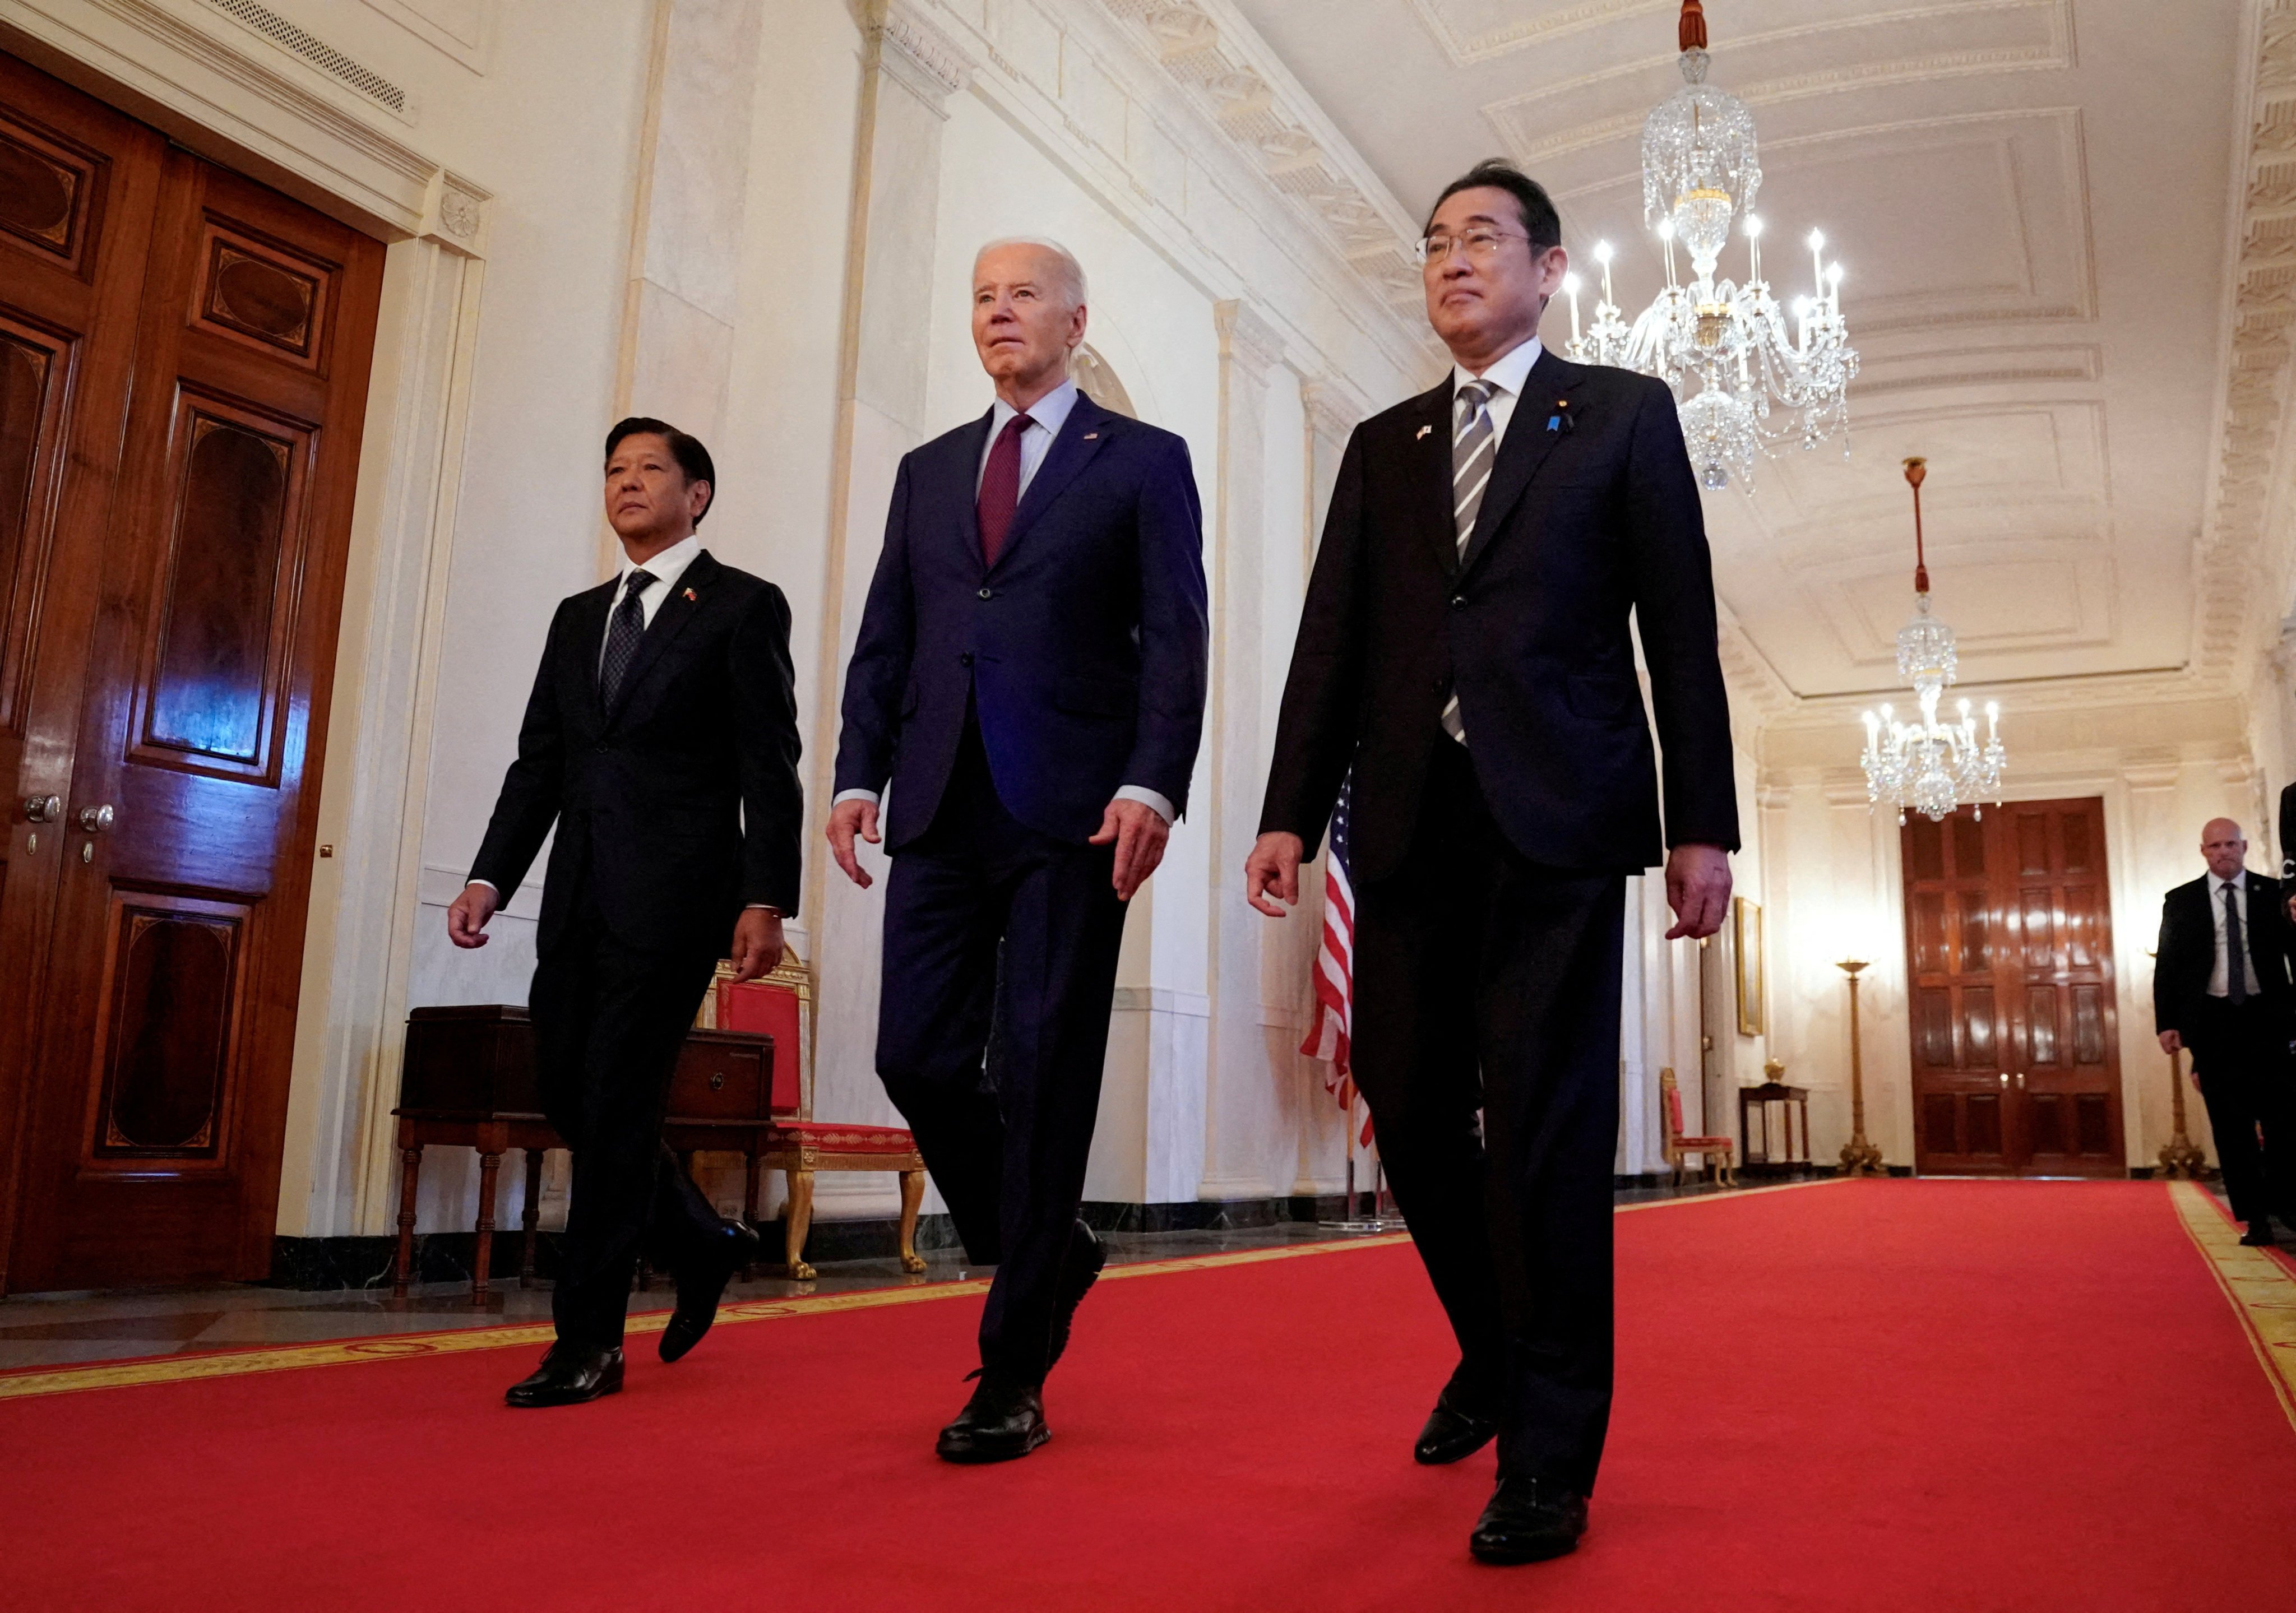 US President Joe Biden escorts Philippine President Ferdinand Marcos Jnr and Japanese Prime Minister Fumio Kishida to their trilateral summit at the White House in Washington, on April 11. Though a Southeast Asian survey found that more would align with China over the US, the region’s distrust of Beijing also ticked higher, amid South China Sea tensions. Photo: Reuters